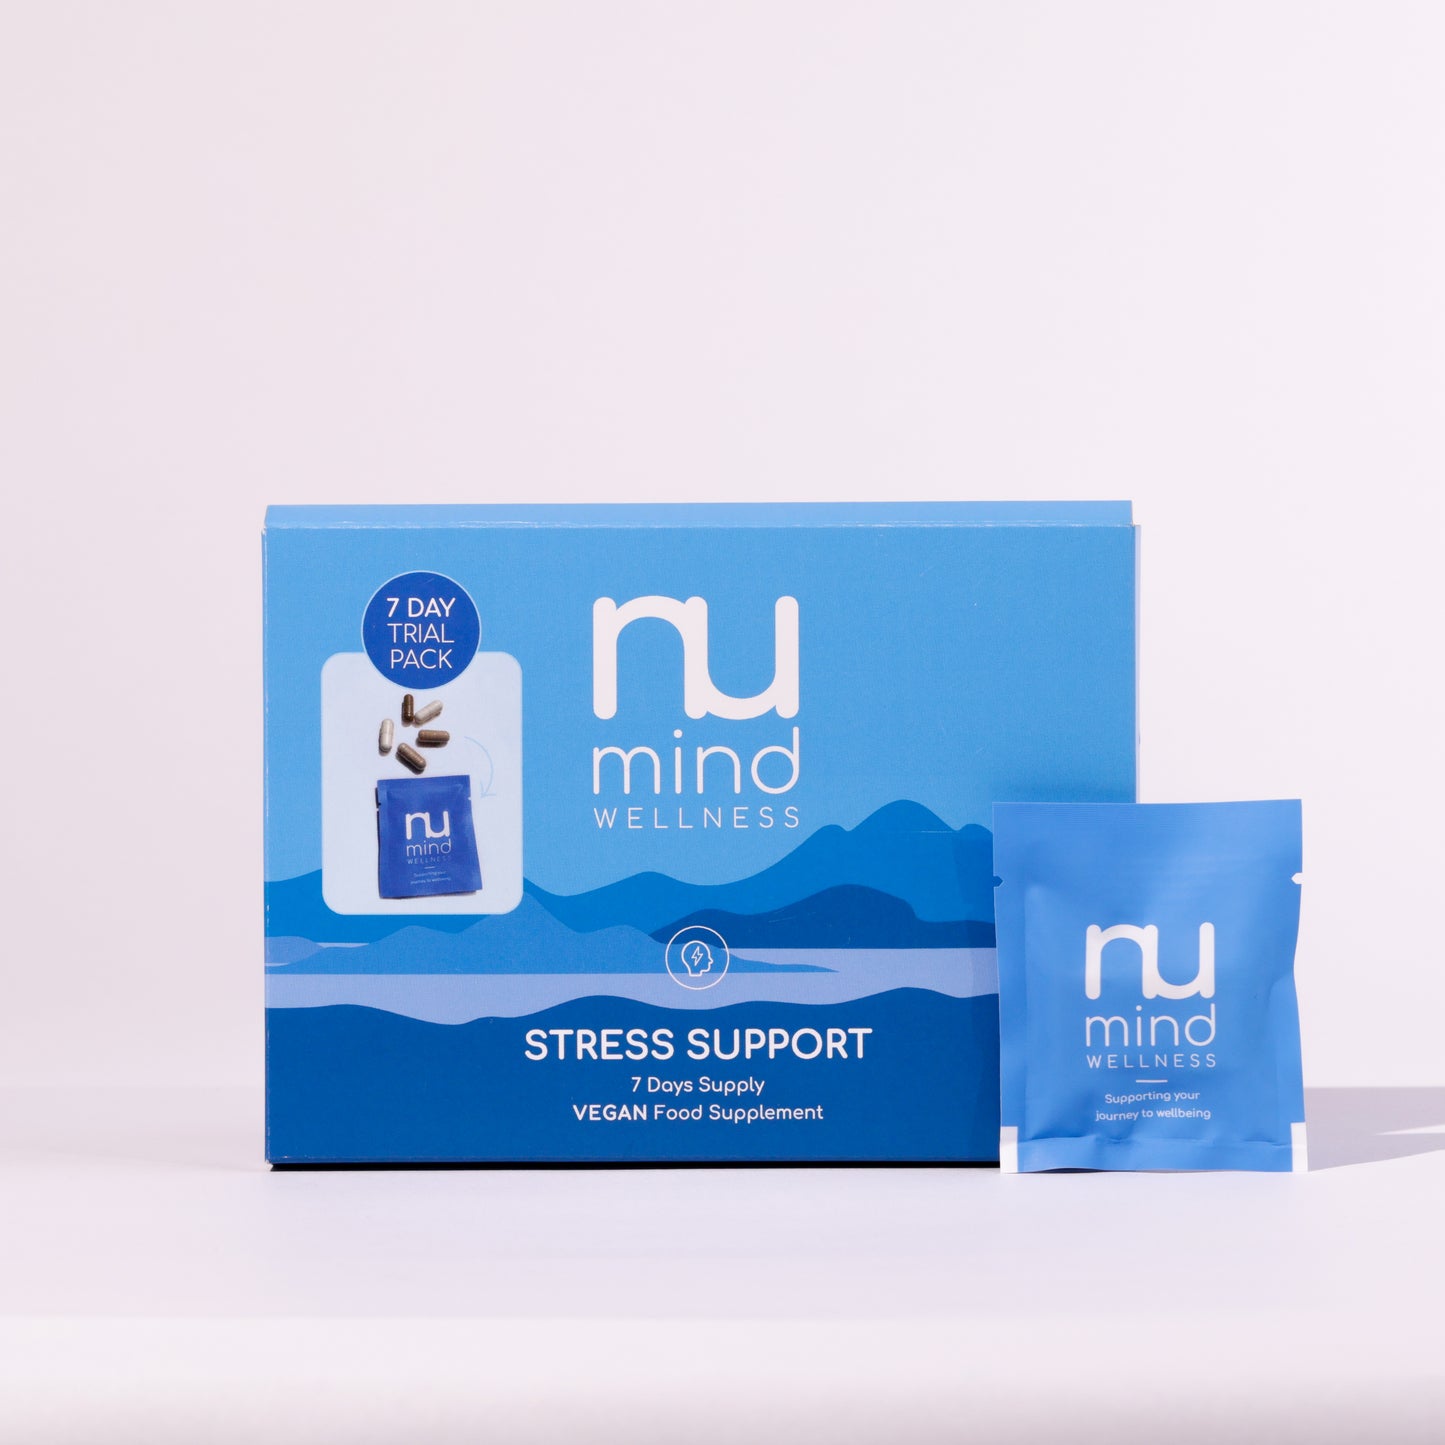 Stress Support - FREE 7 Day Trial